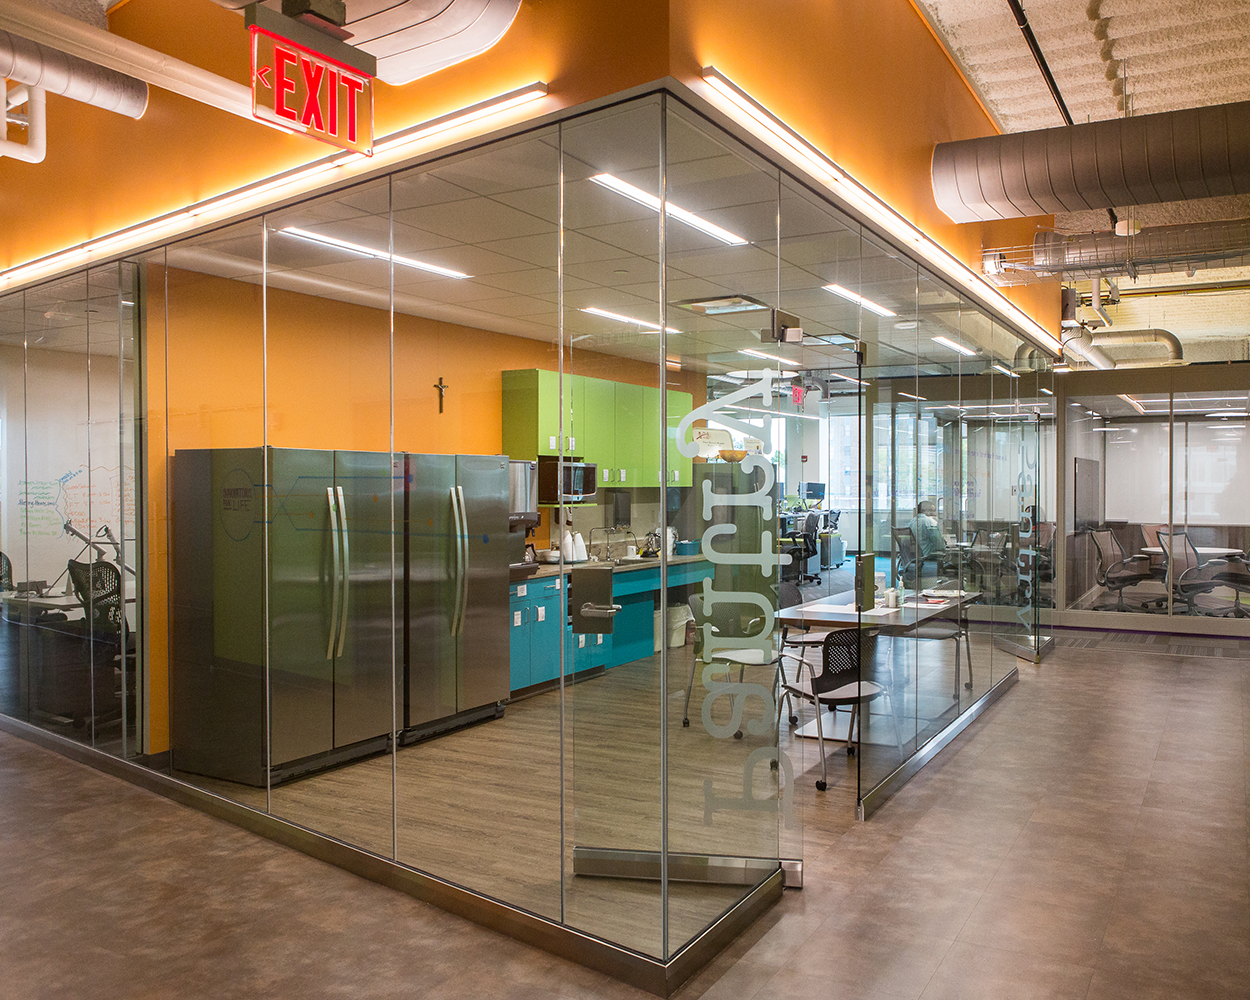 Sleight office lighting fixtures illuminate the edges of a glass-walled workplace kitchen.